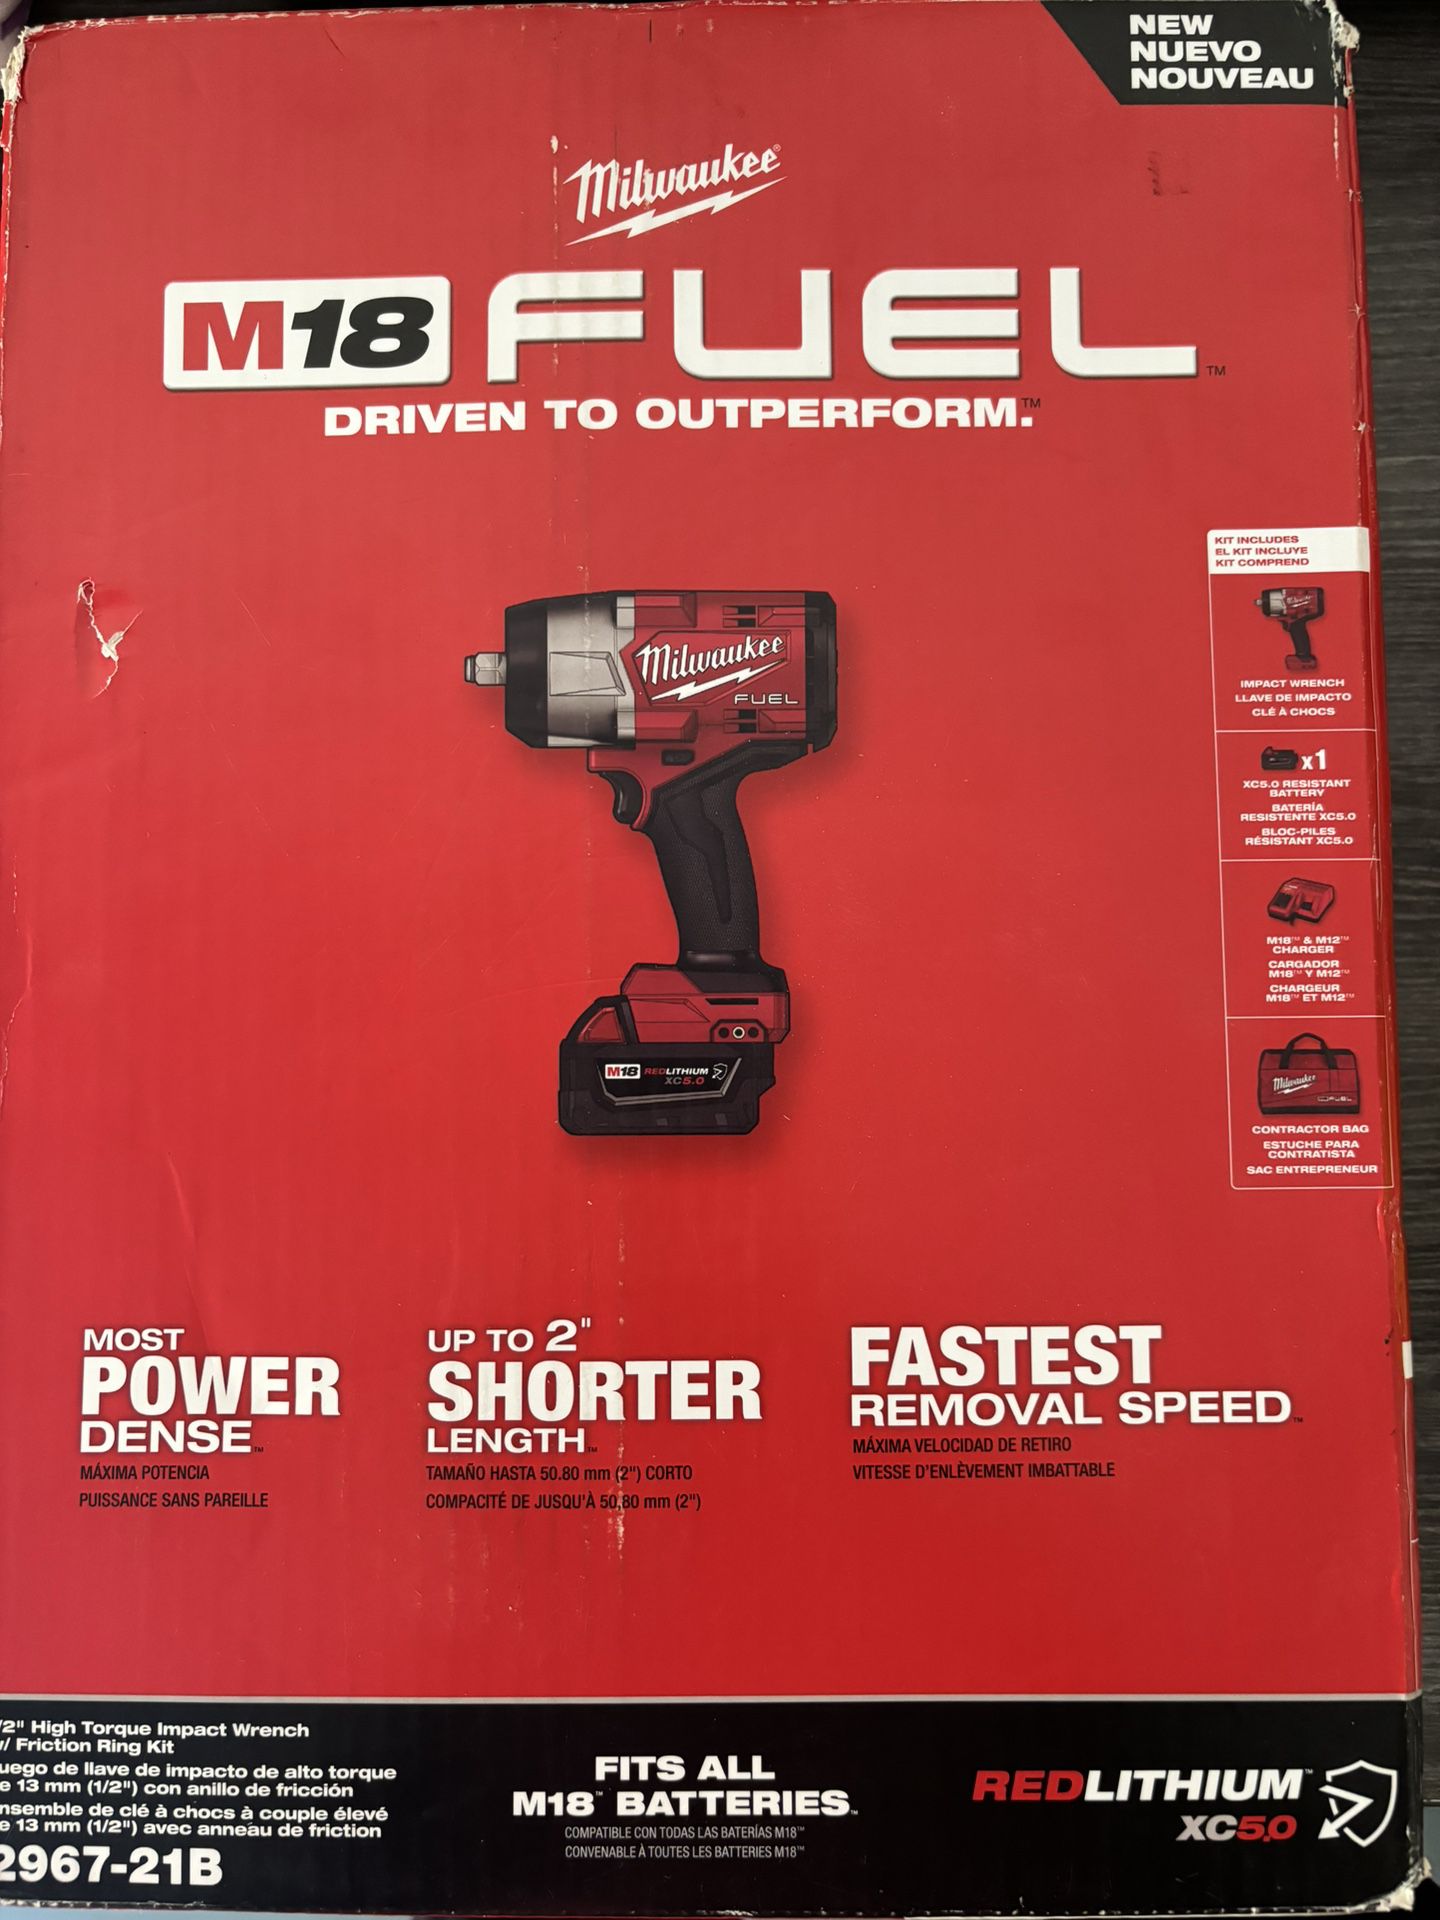  M18 FUEL 18V Lithium-Ion Brushless Cordless 1/2 in. Impact Wrench w/Friction Ring Kit w/One 5.0 Ah Battery and Bag